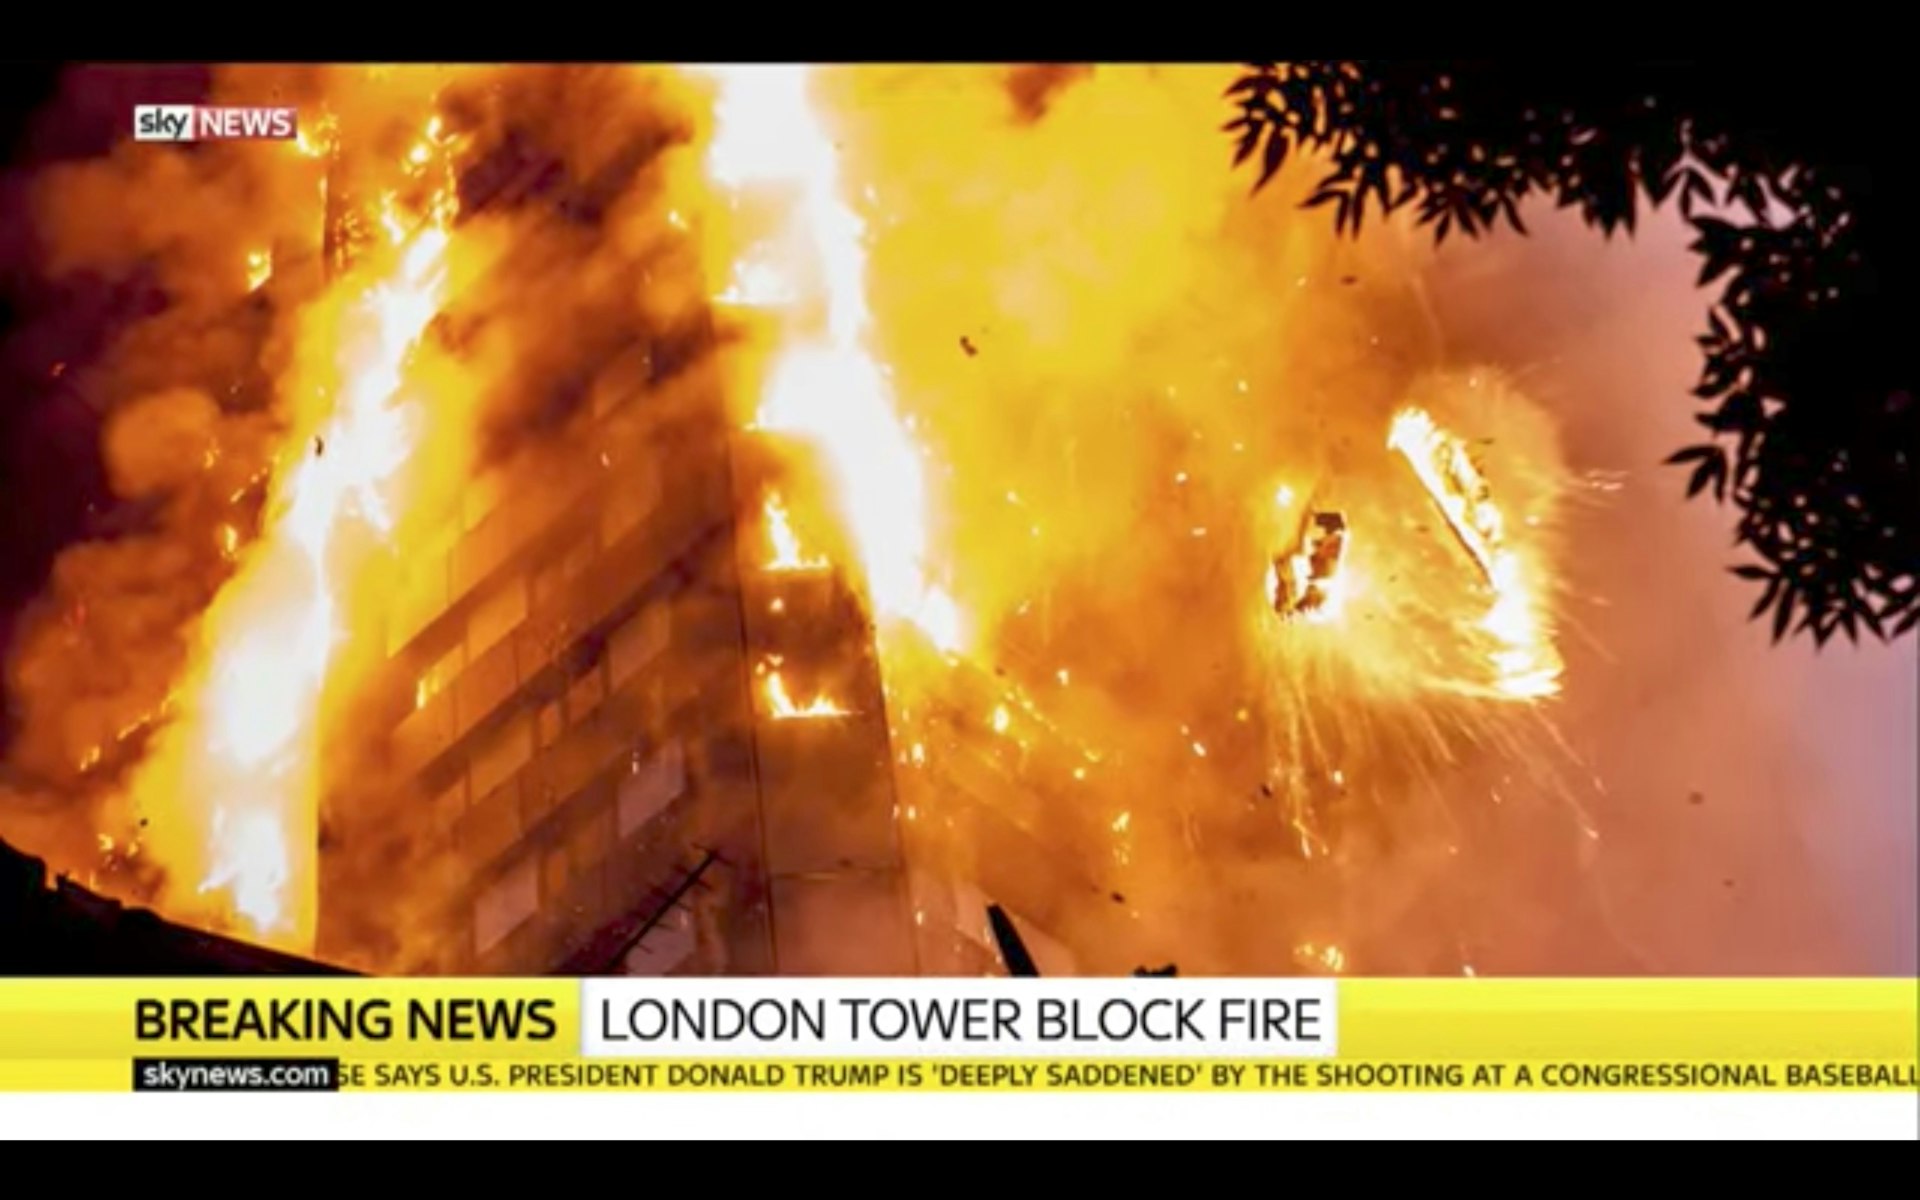 Don't you dare say the fatal Grenfell Tower fire is not 'political'